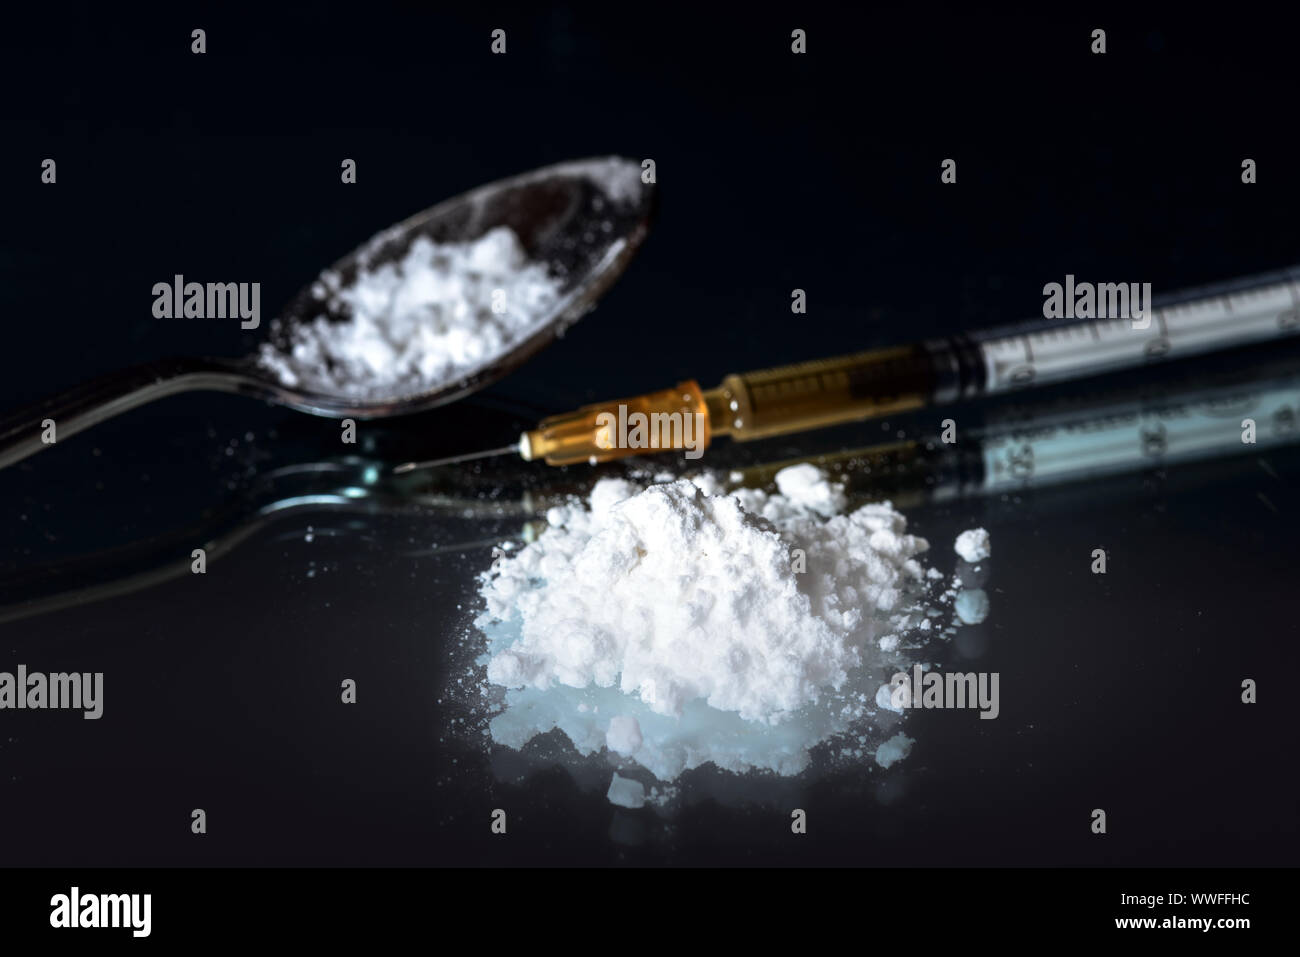 White powder, syringe and drug on spoon. Narcotic addiction concept. Black mirror background Stock Photo